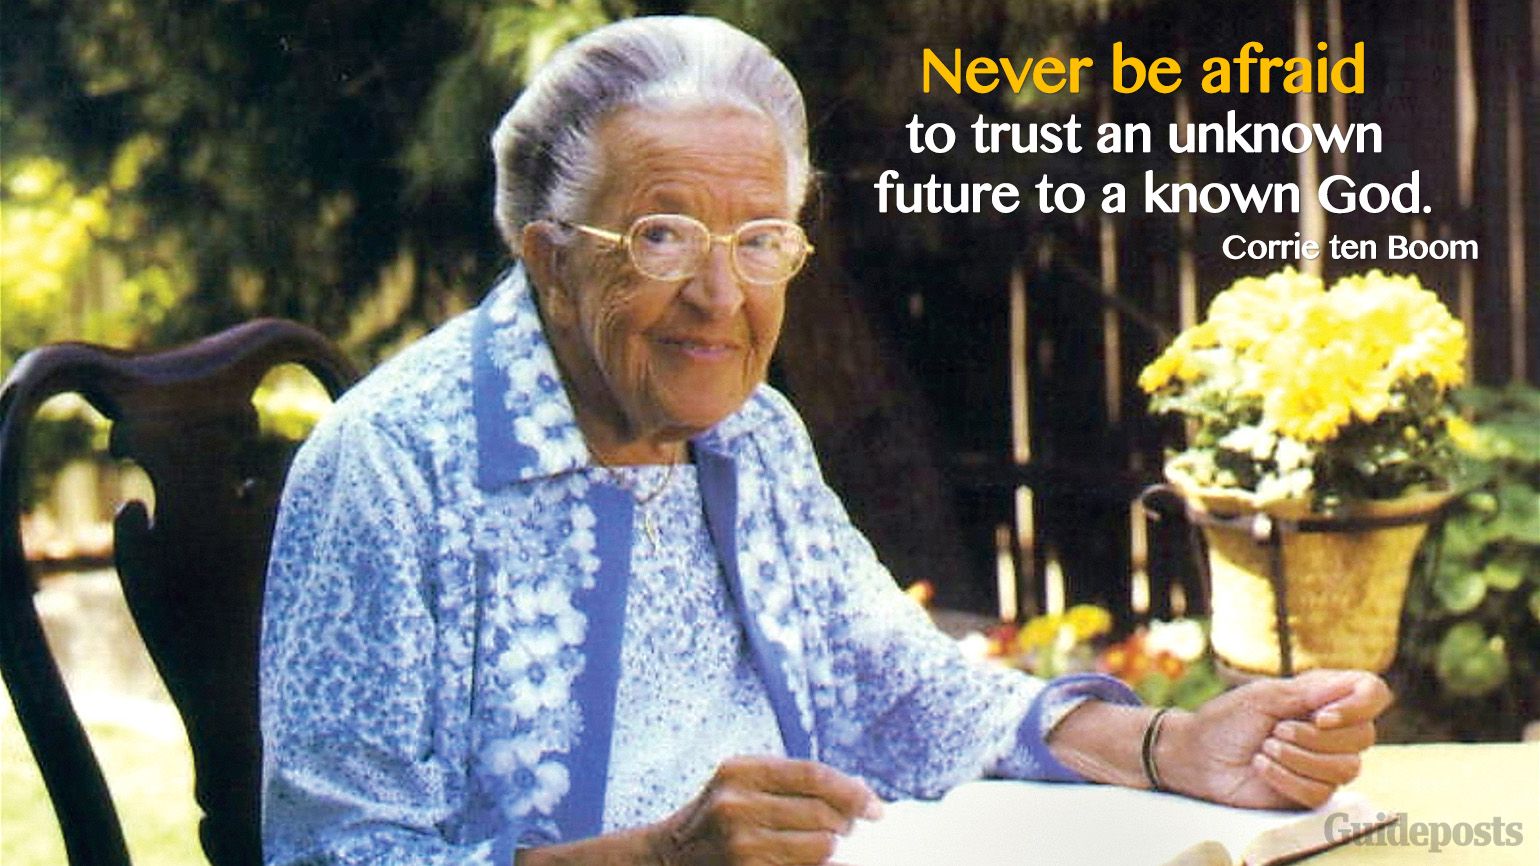 10 Inspiring Quotes from Corrie ten Boom - Guideposts